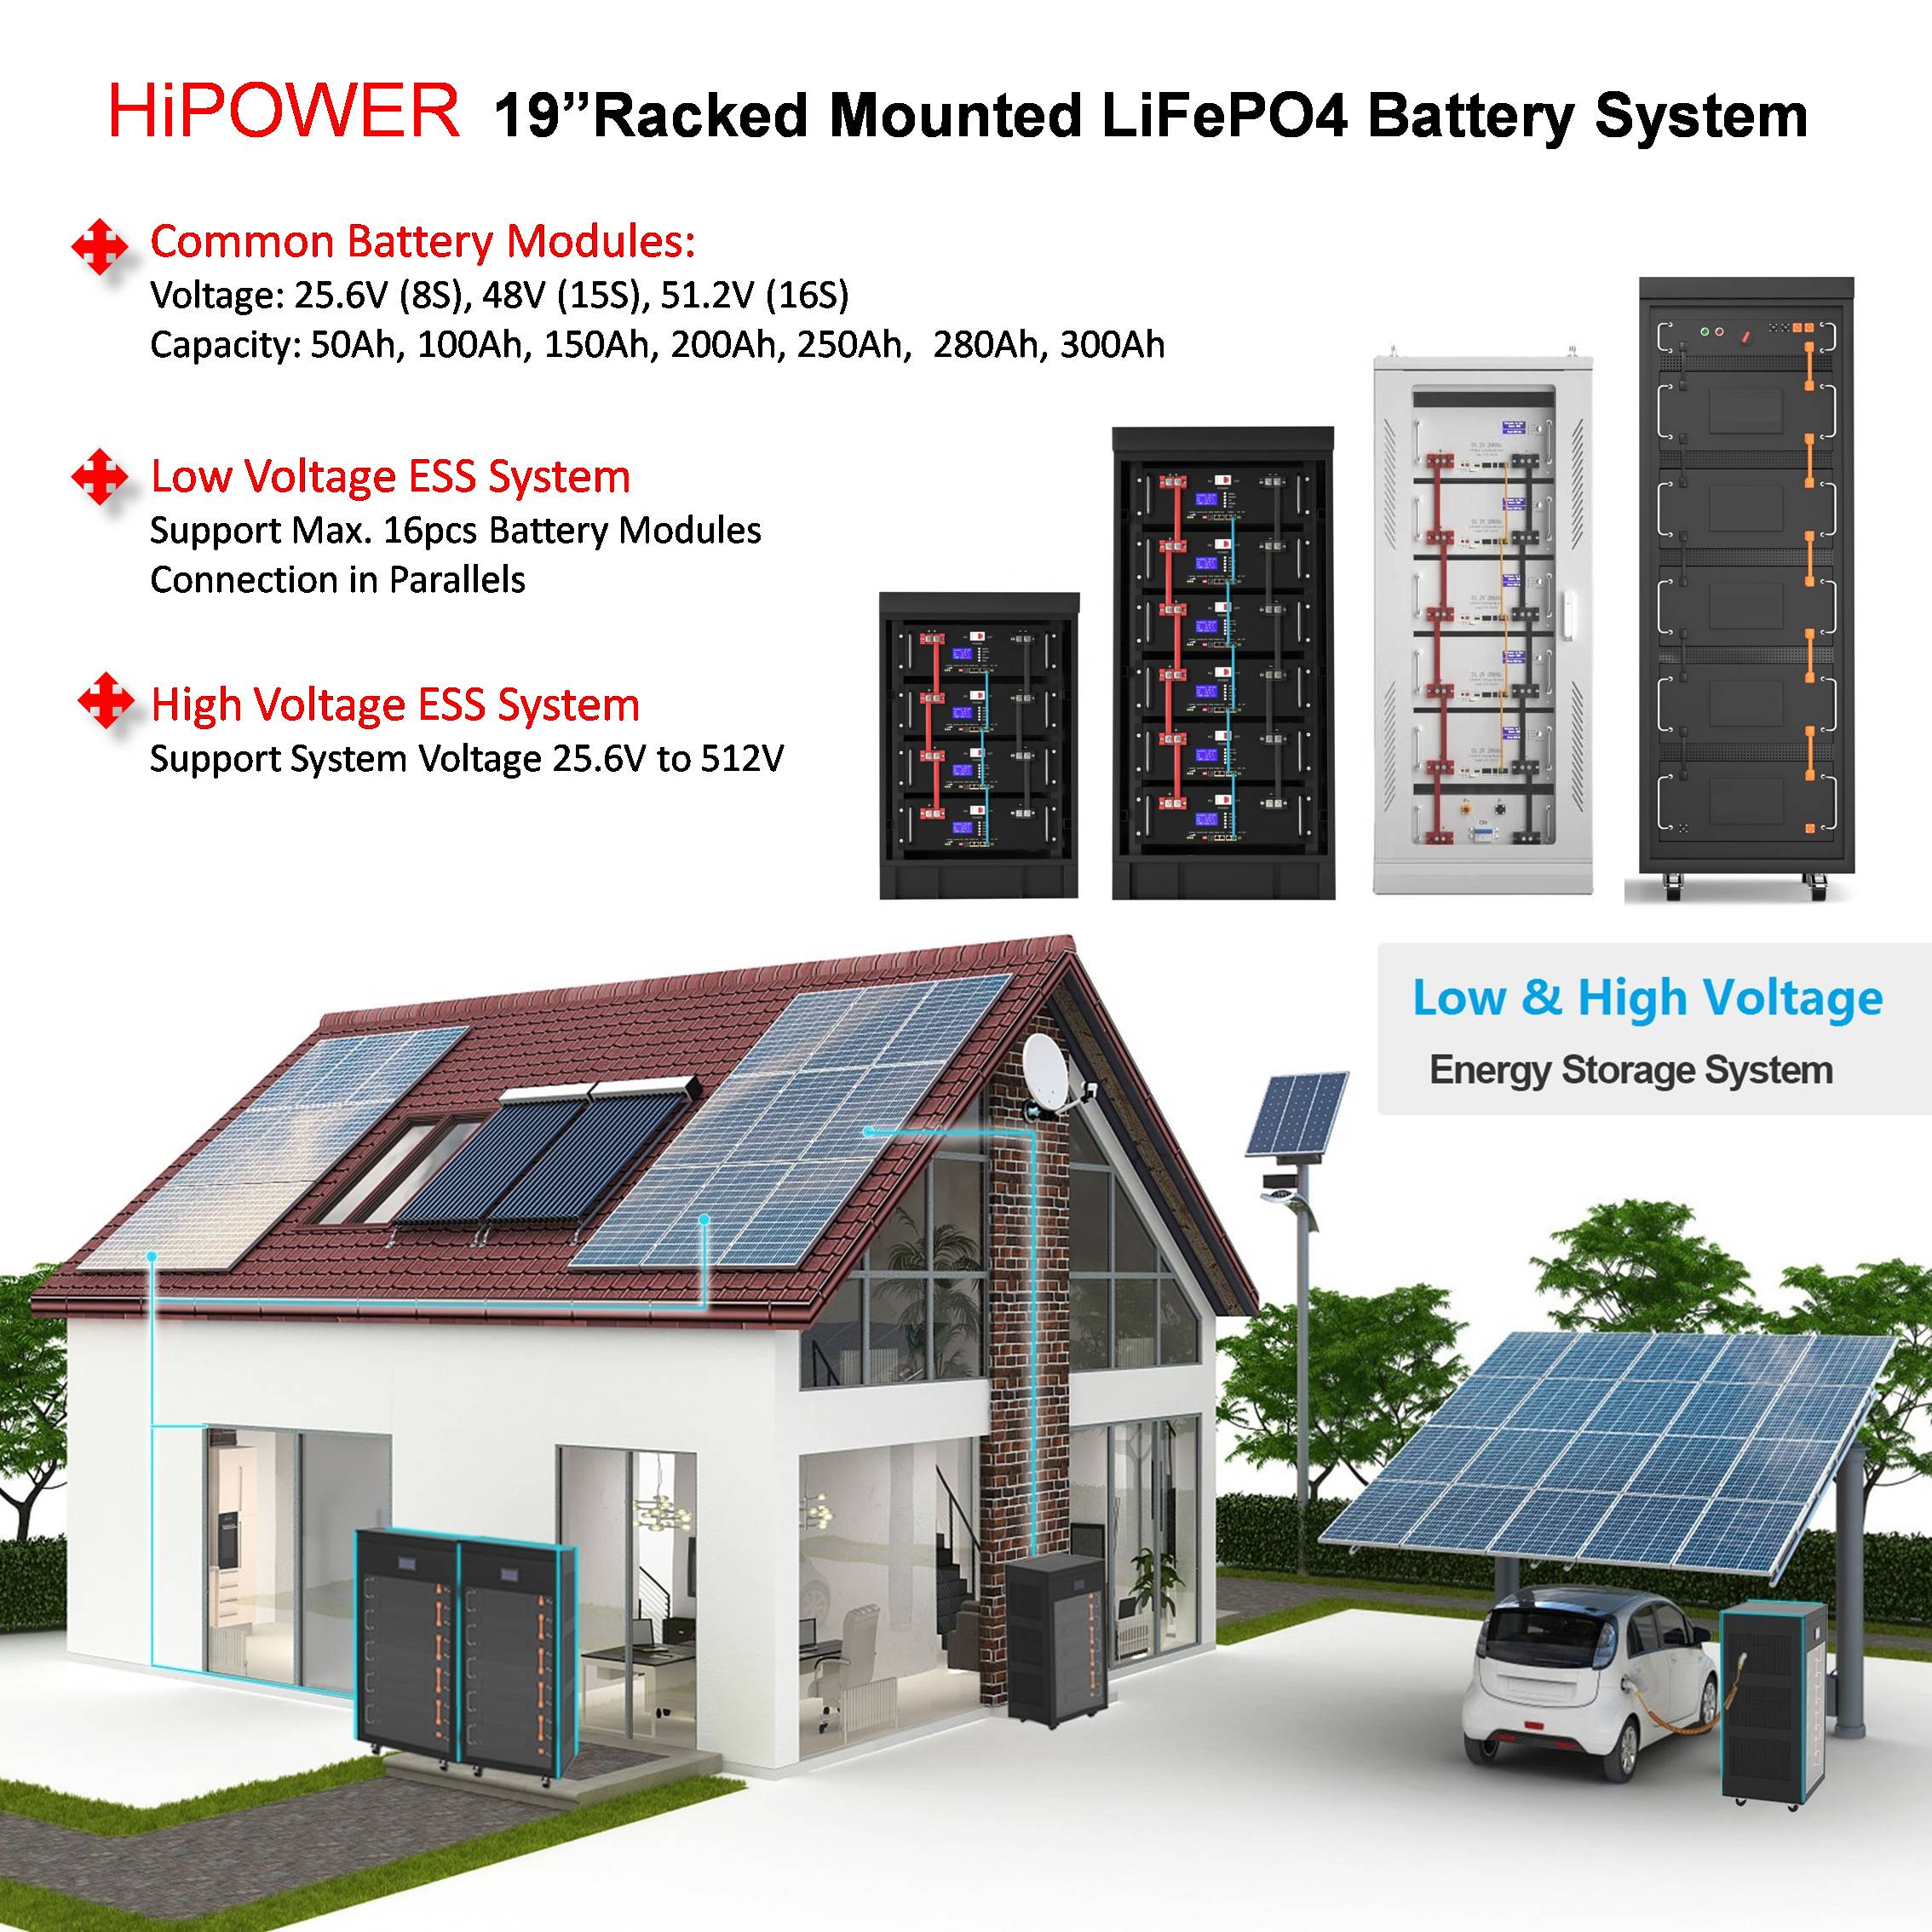 HiPOWER Rack-Mounted LiFePO4 Battery Systems